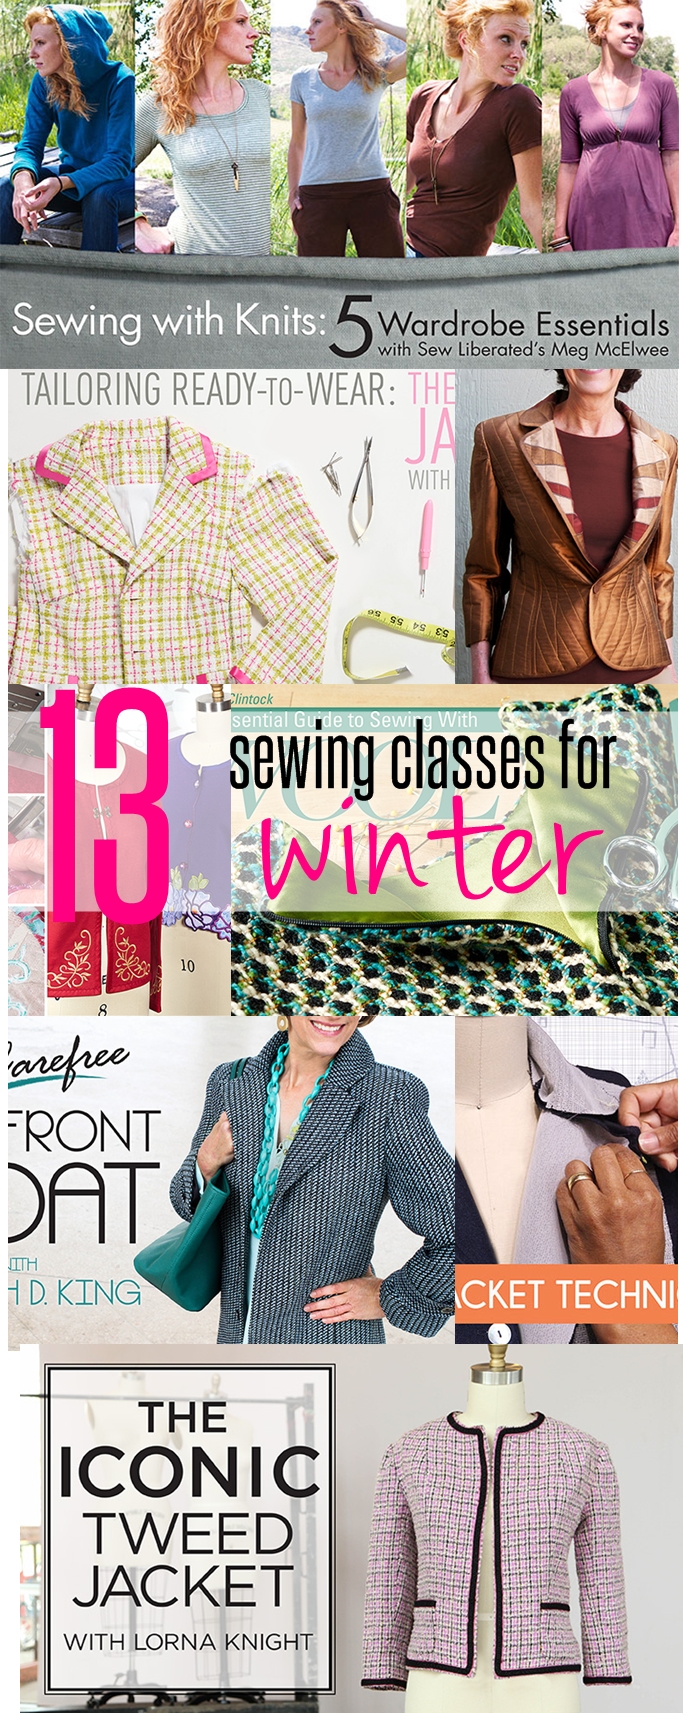 13 sewing classes for winter on sewsomestuff.com